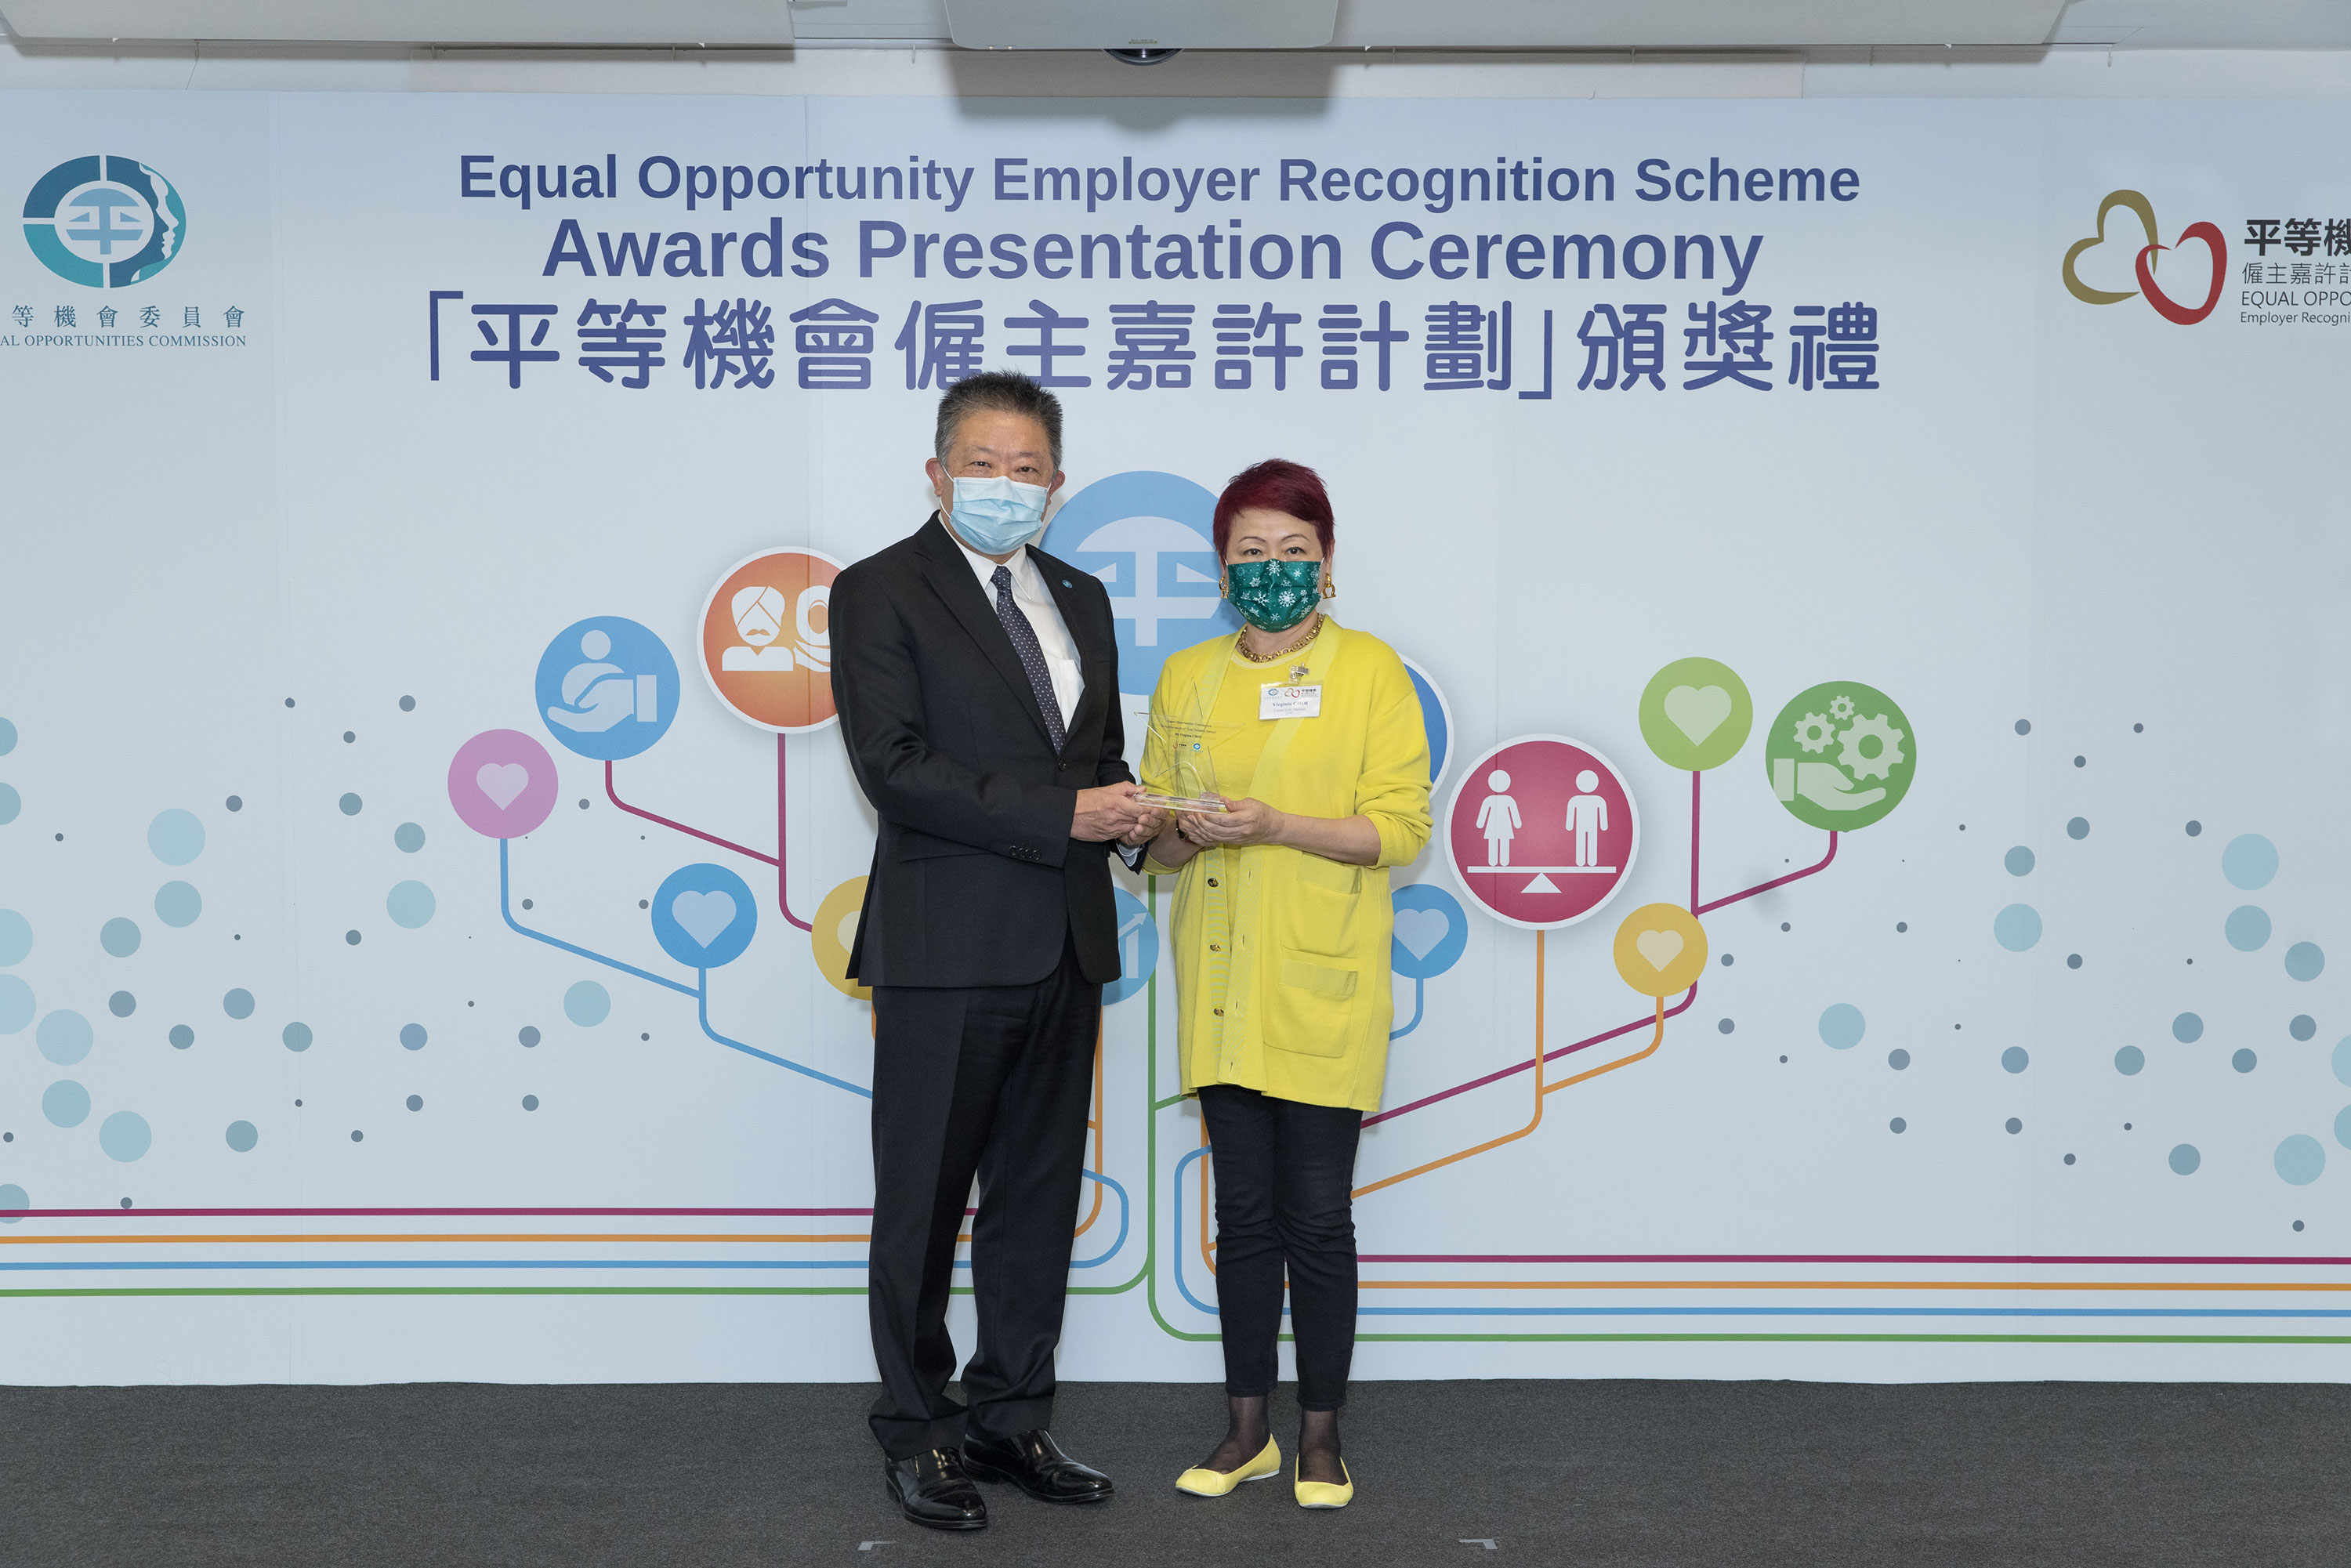 Mr Ricky CHU Man-kin, IDS, Chairperson of the Equal Opportunities Commission (left) presents souvenir to former EOC Member Ms Virginia CHOI Wai Kam, JP (right), who served as member of the assessment panel of the Equal Opportunity Employer Recognition Scheme.